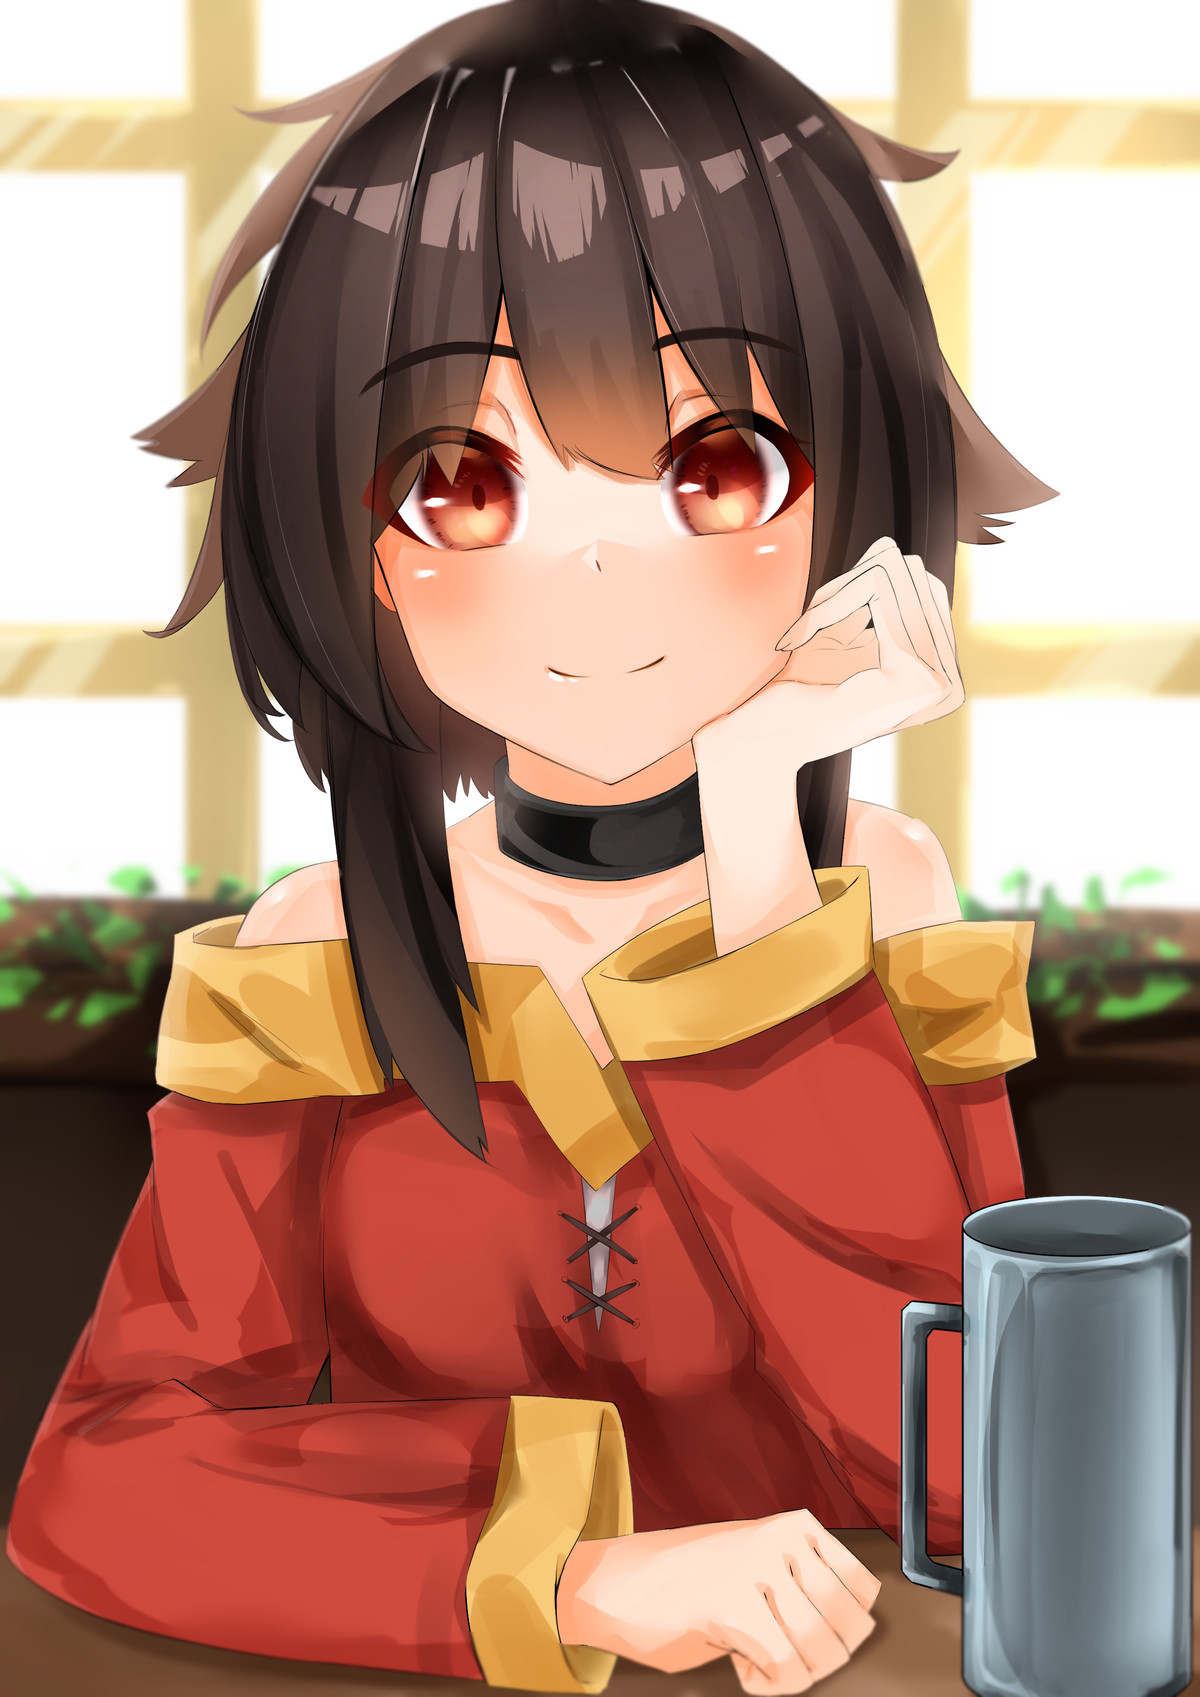 Daily Megu - 1176: Hot Coffee. join list: DailySplosion (826 subs)Mention History Source: .. Megumin hentai is like a coinflip in terms of whether or not she's depicted as a loli. High risk high reward.